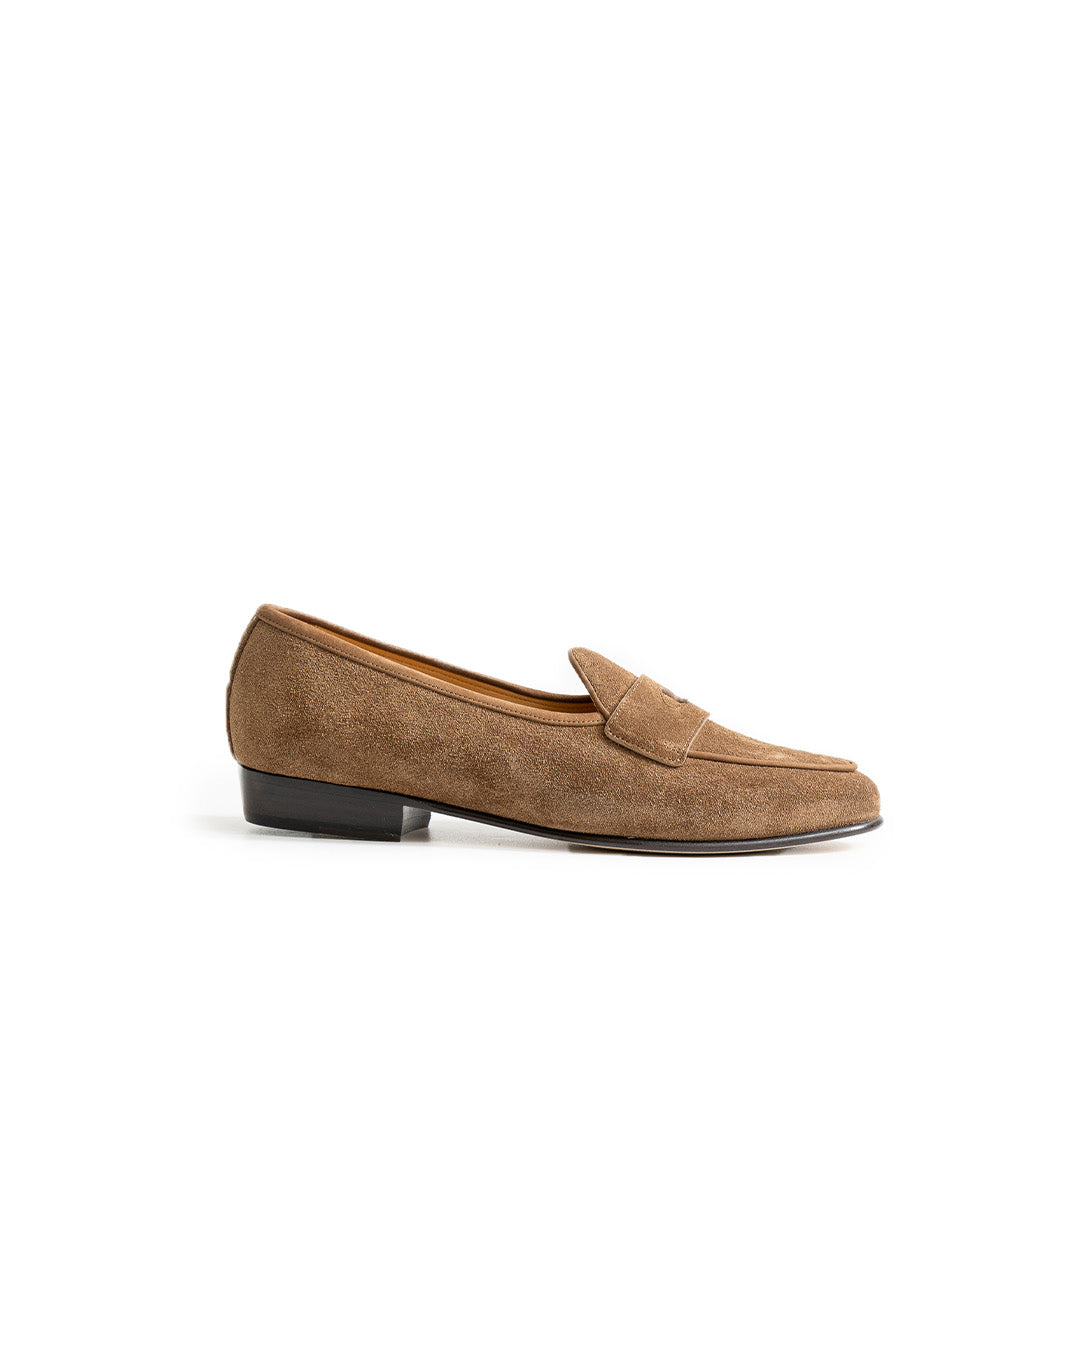 Baudoin & Lange Sagan Classic Ginkgo Loafers in Pecan Glove Suede – The ...